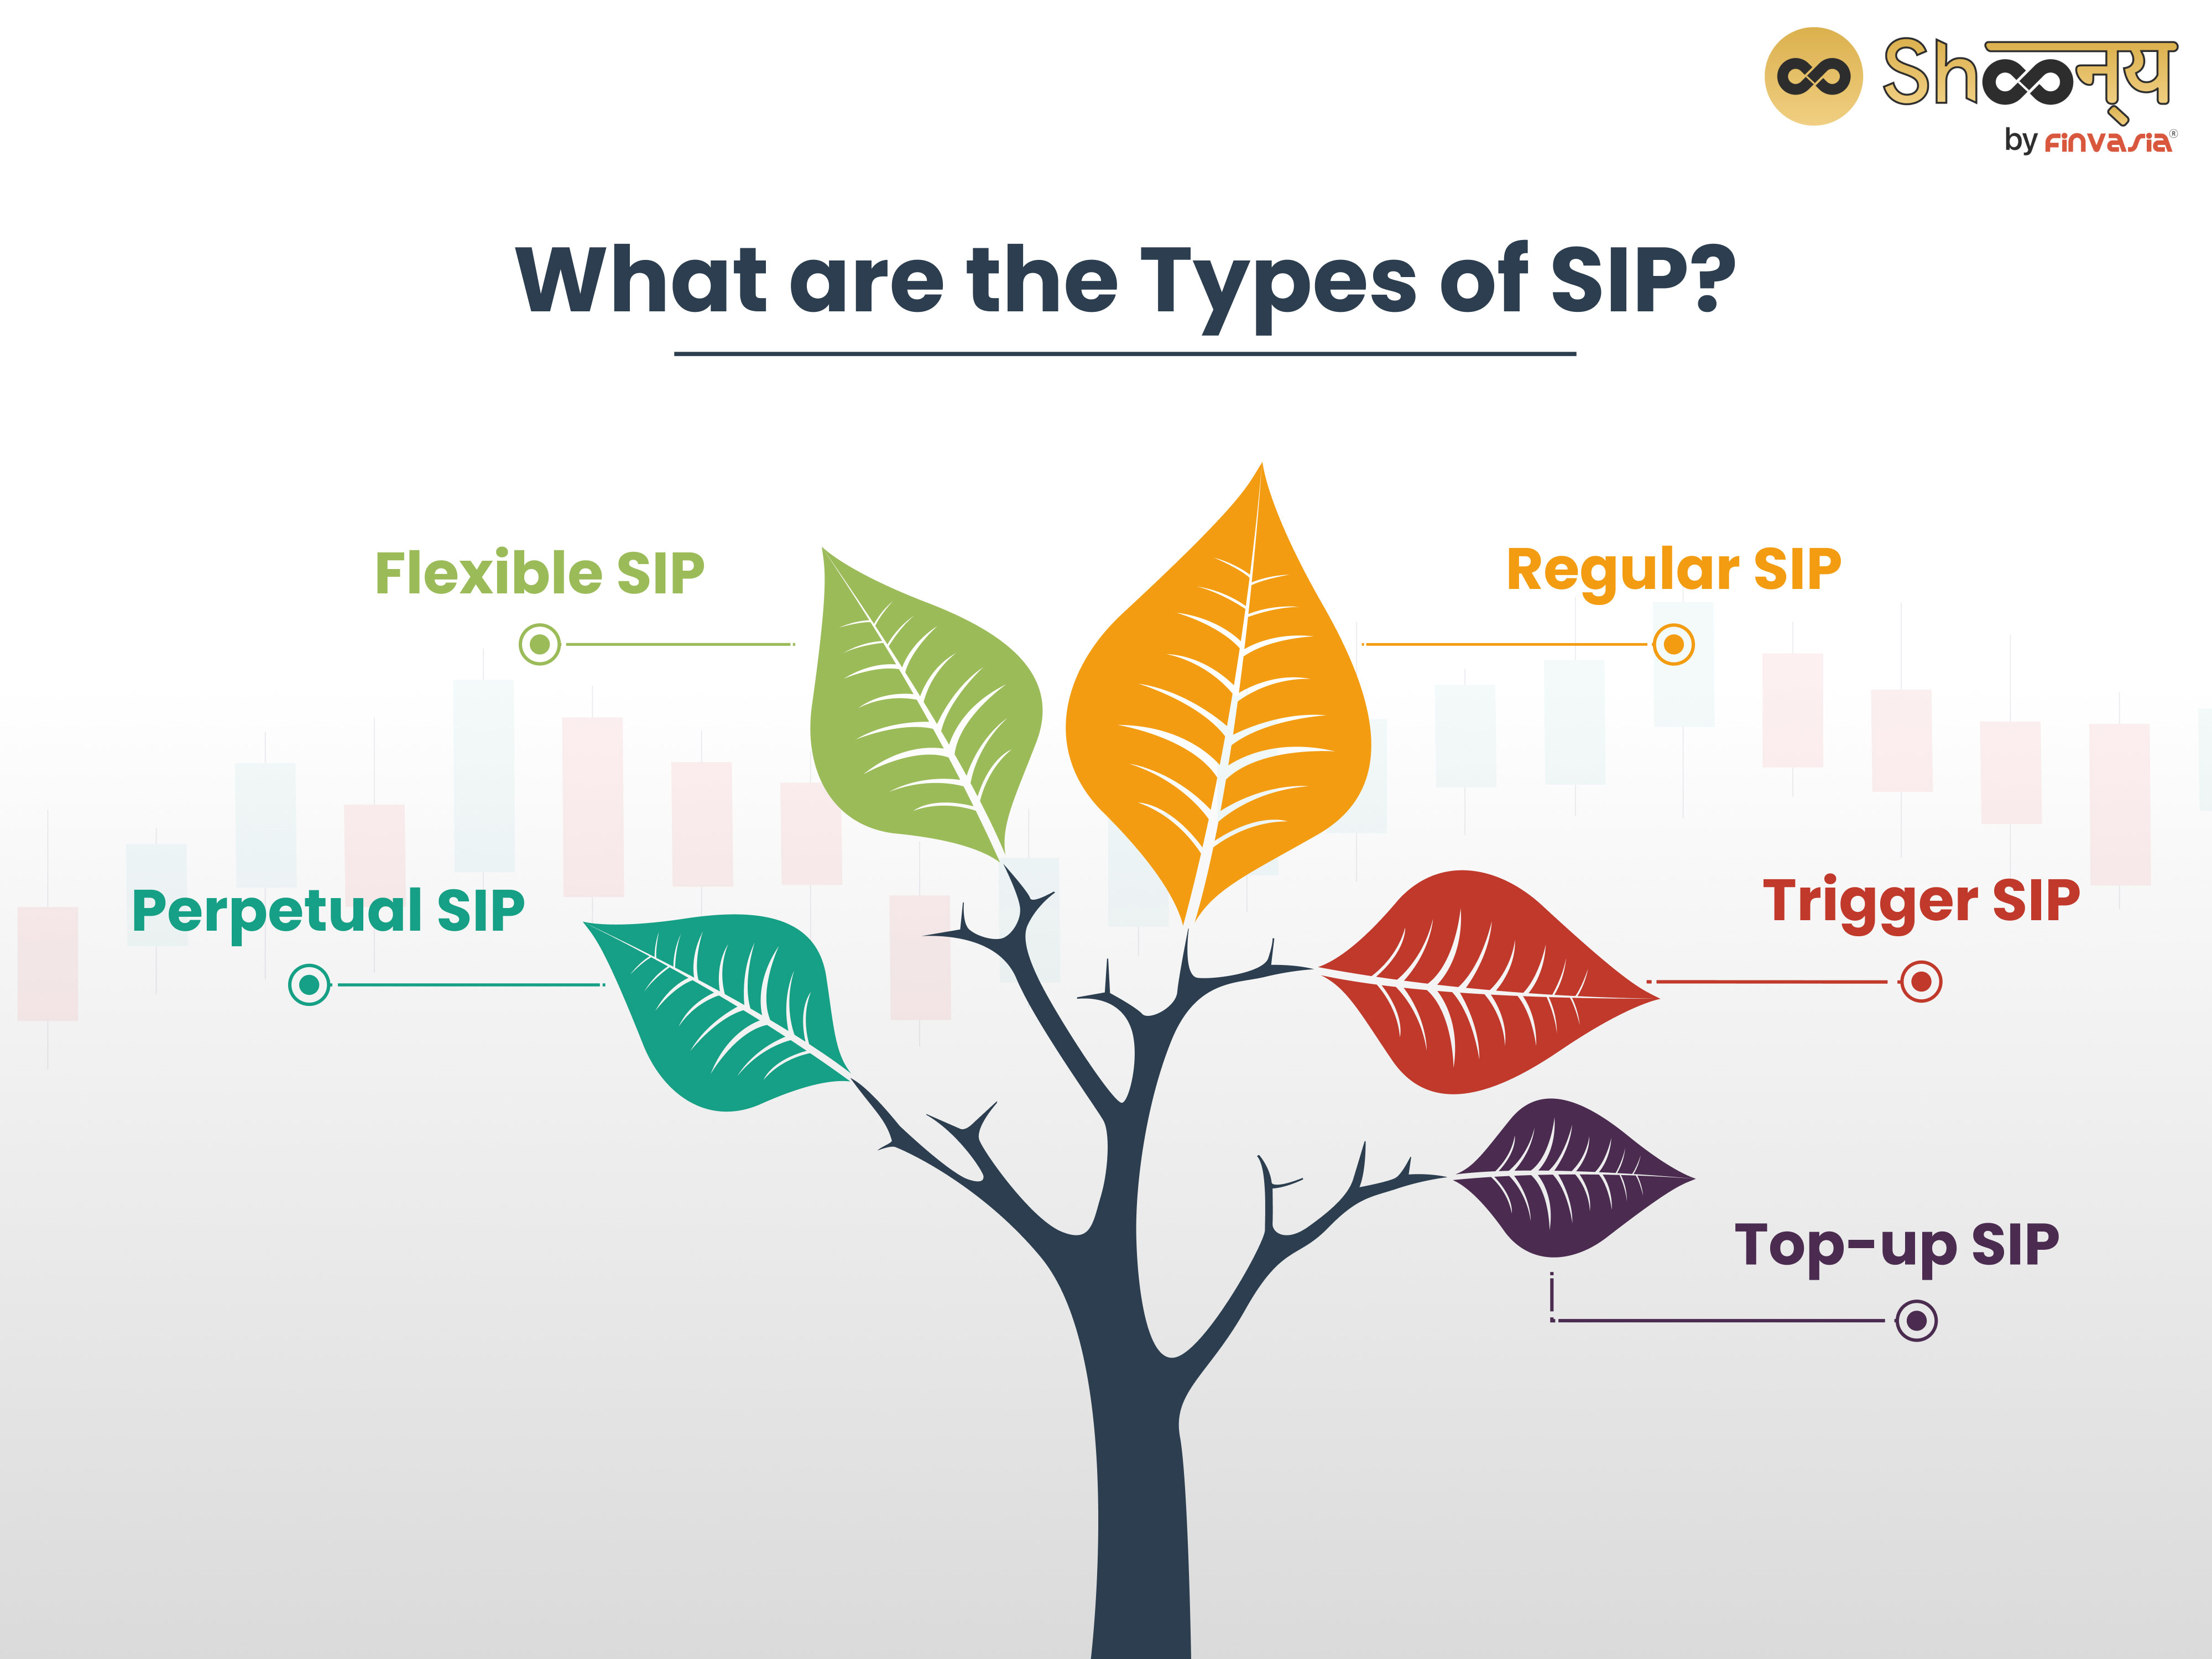 What are the Types of SIP?
